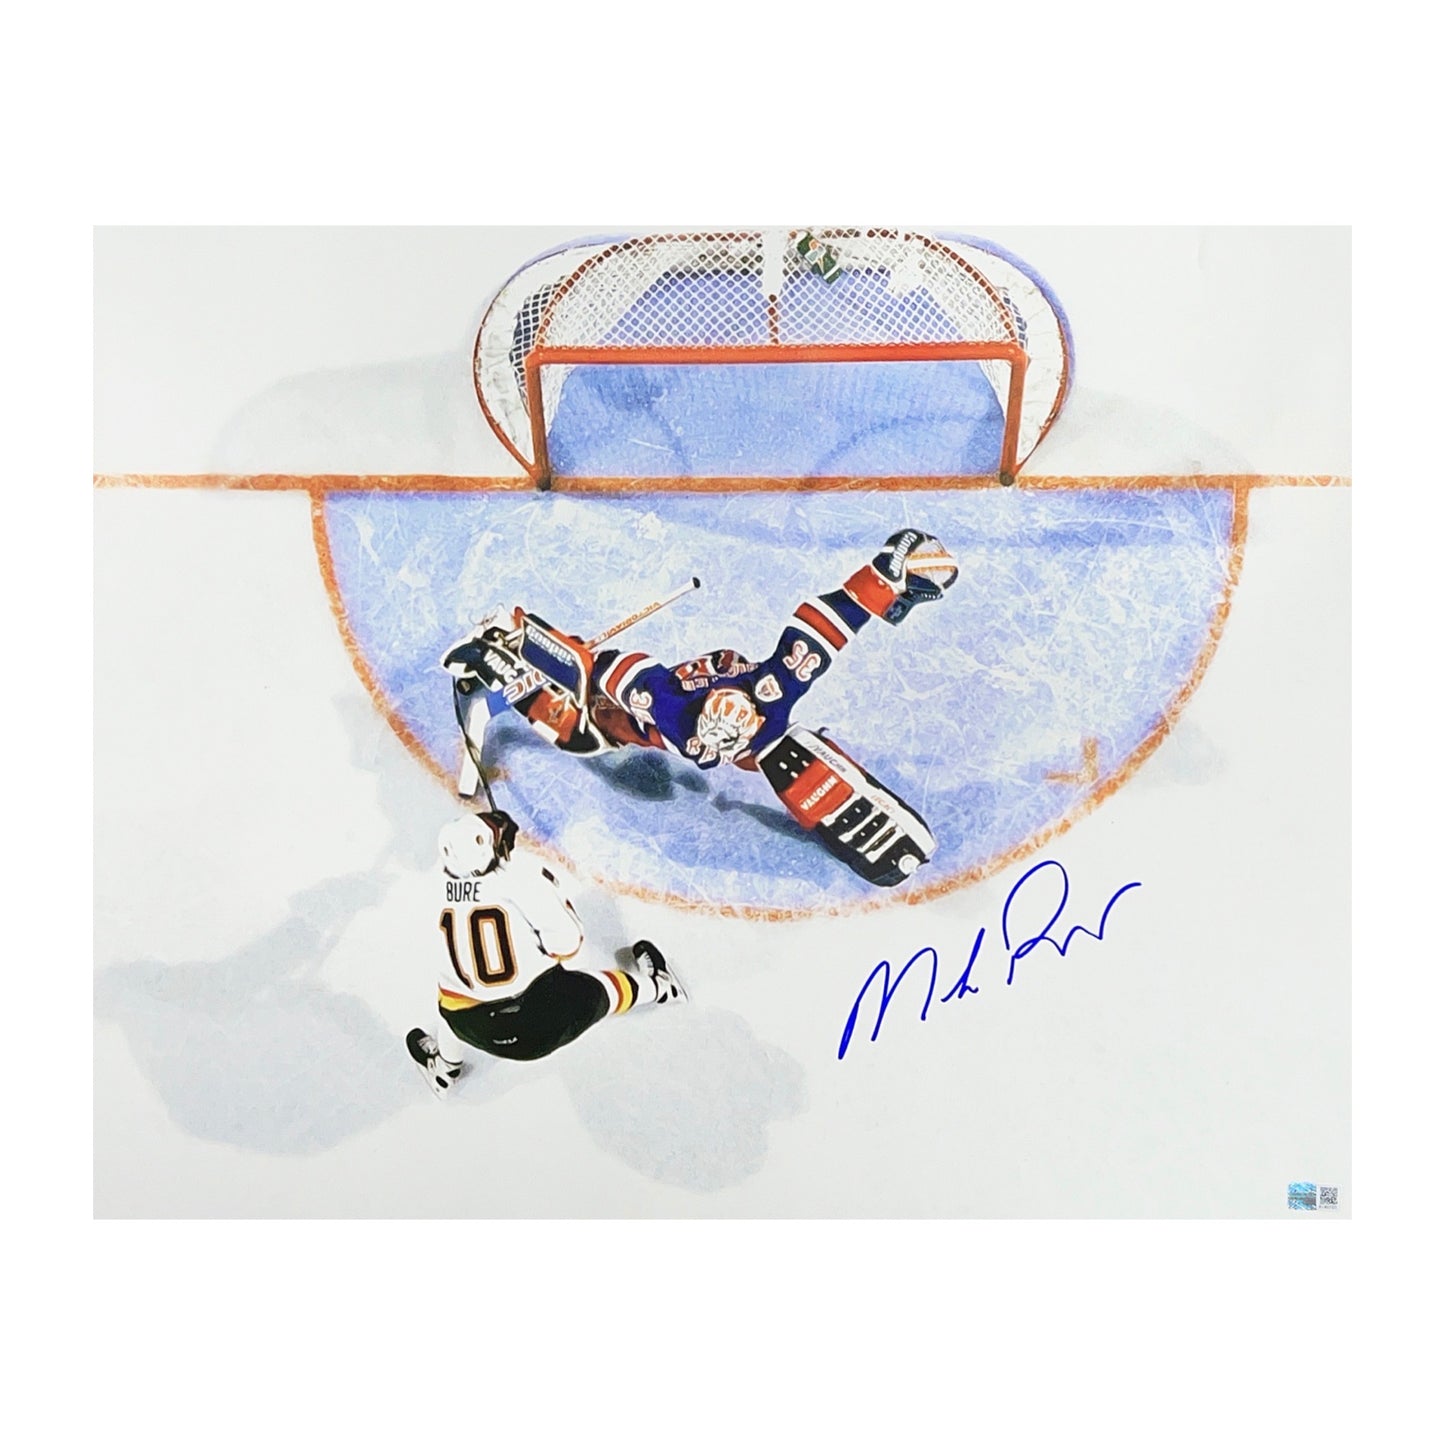 Mike Richter Autographed New York Rangers Stop on Bure 16x20 Steiner CX